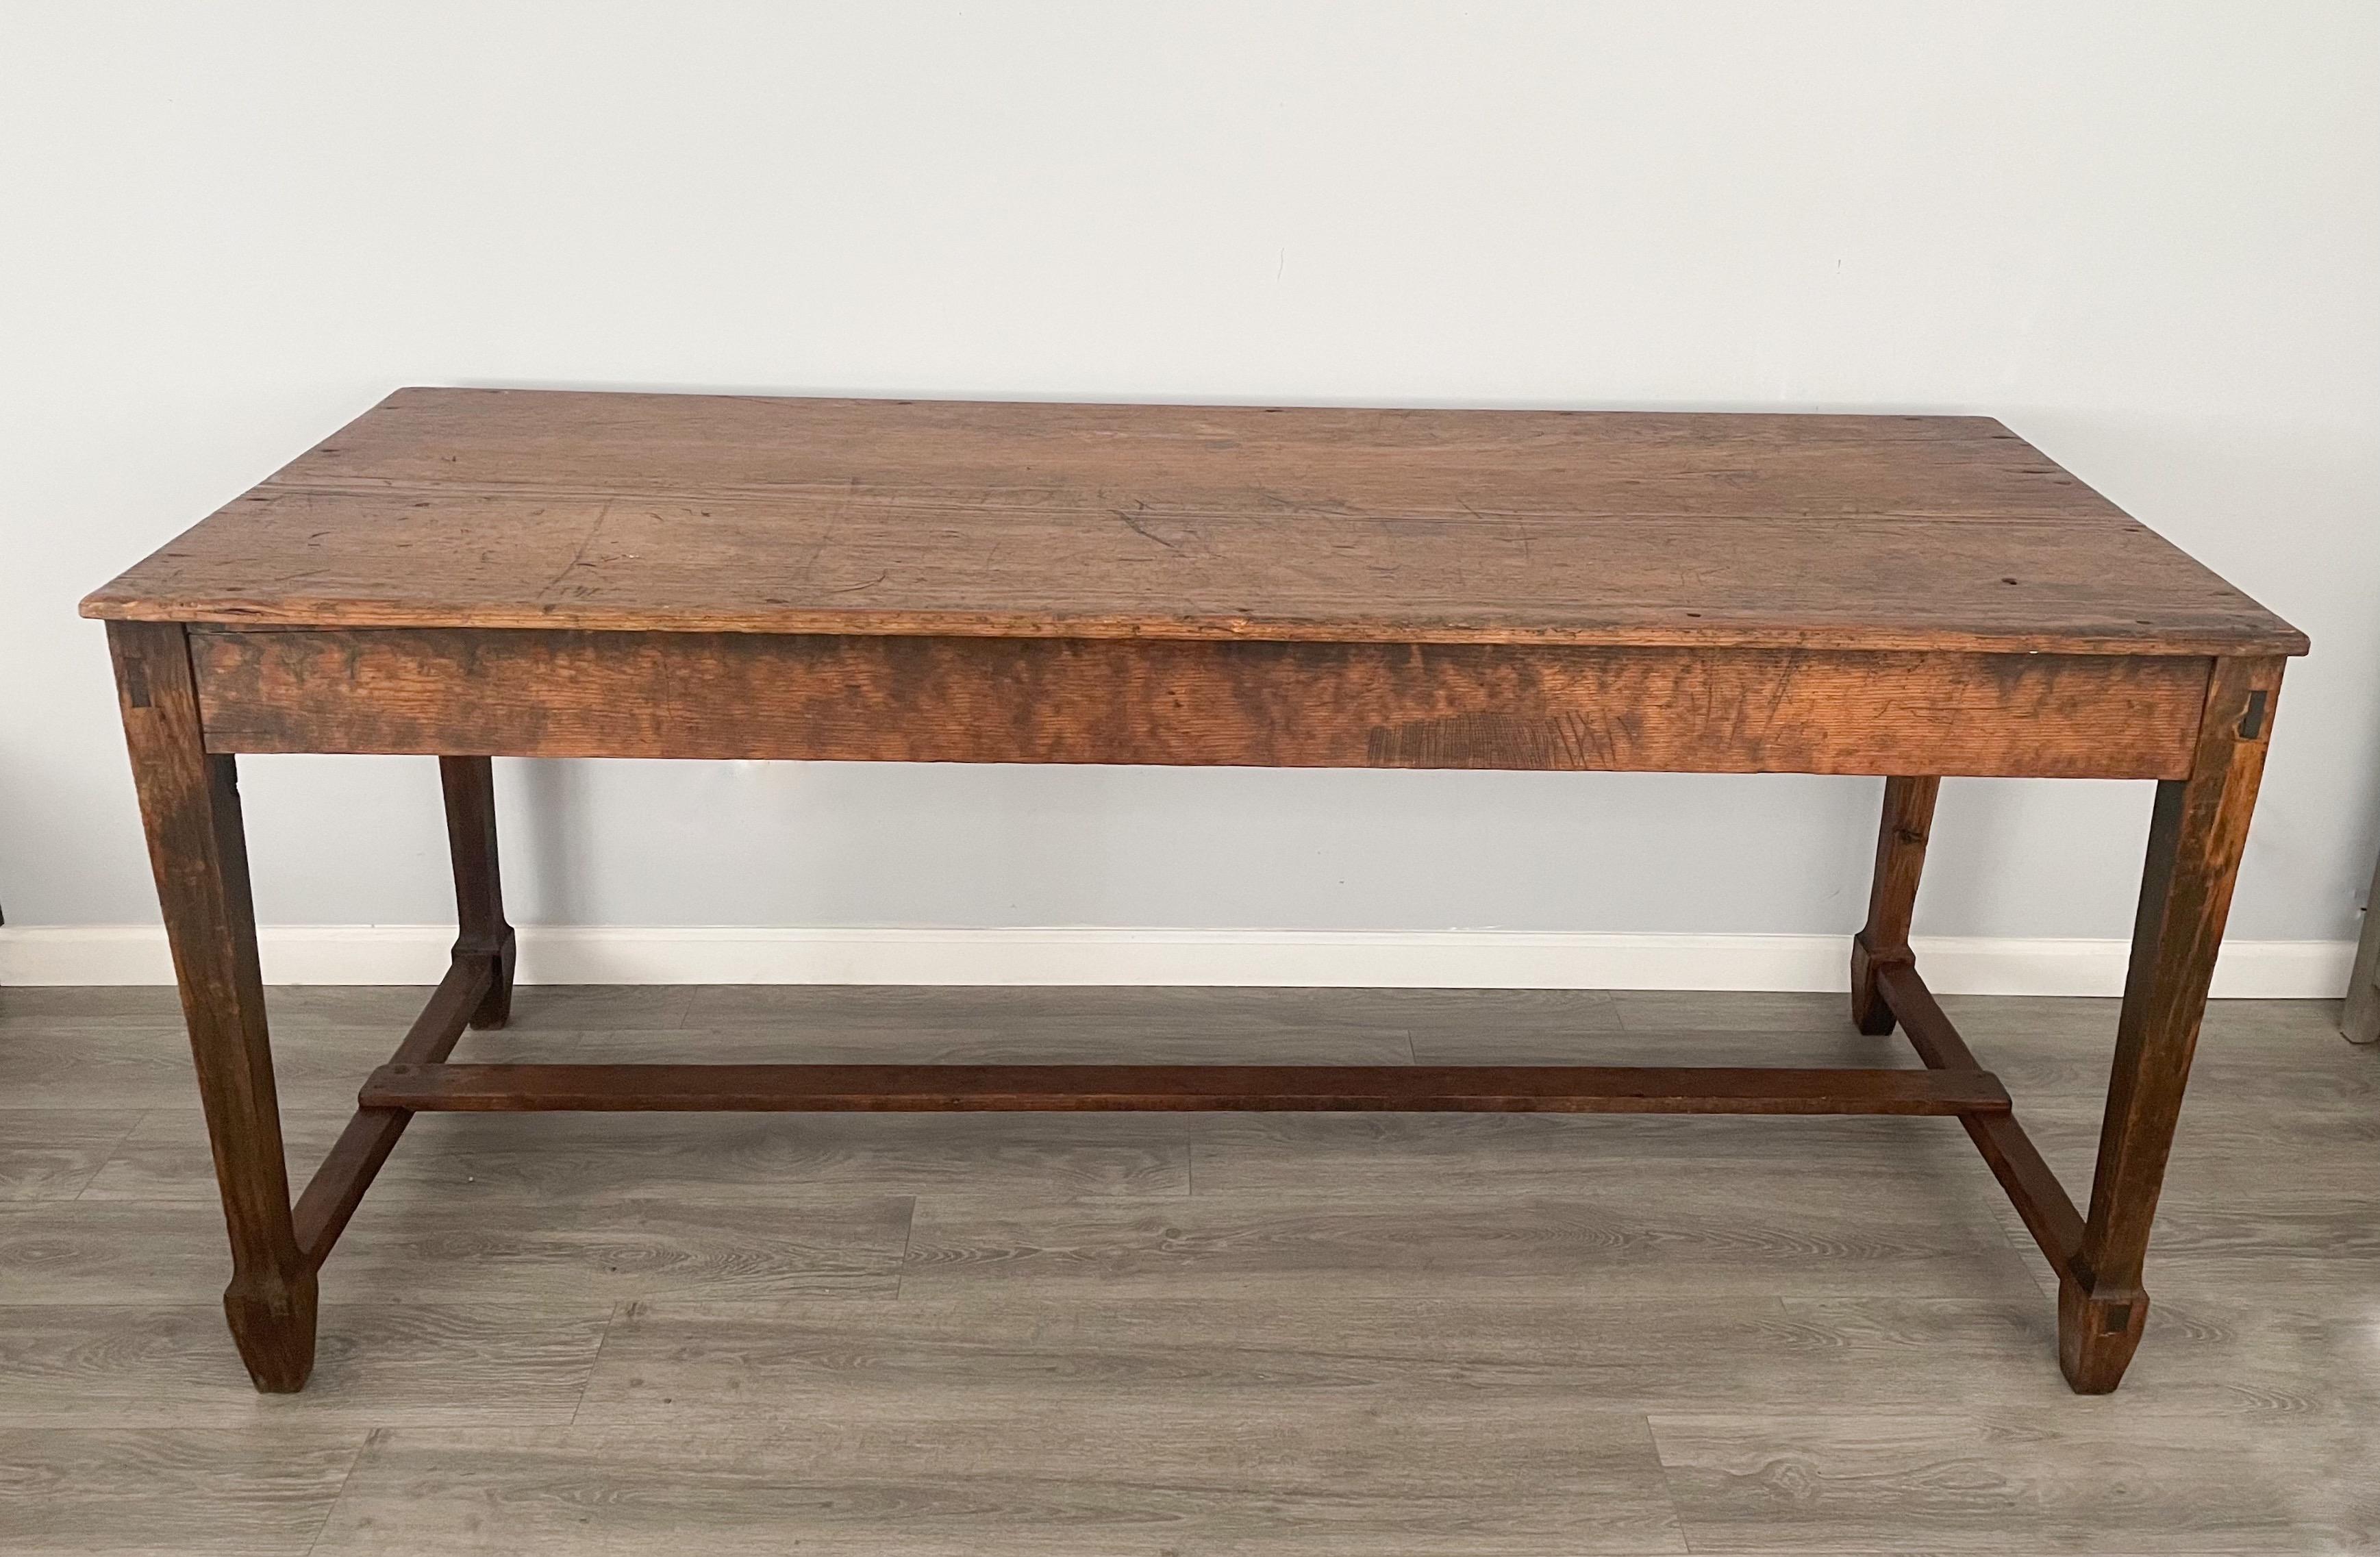 The table consists of a table top made from a single slab of wood. The base is constructed of mortise and tenon joinery, and a center stretcher. 

 The table show wear consistent with it’s long utilitarian history, it is however sturdy and strong,